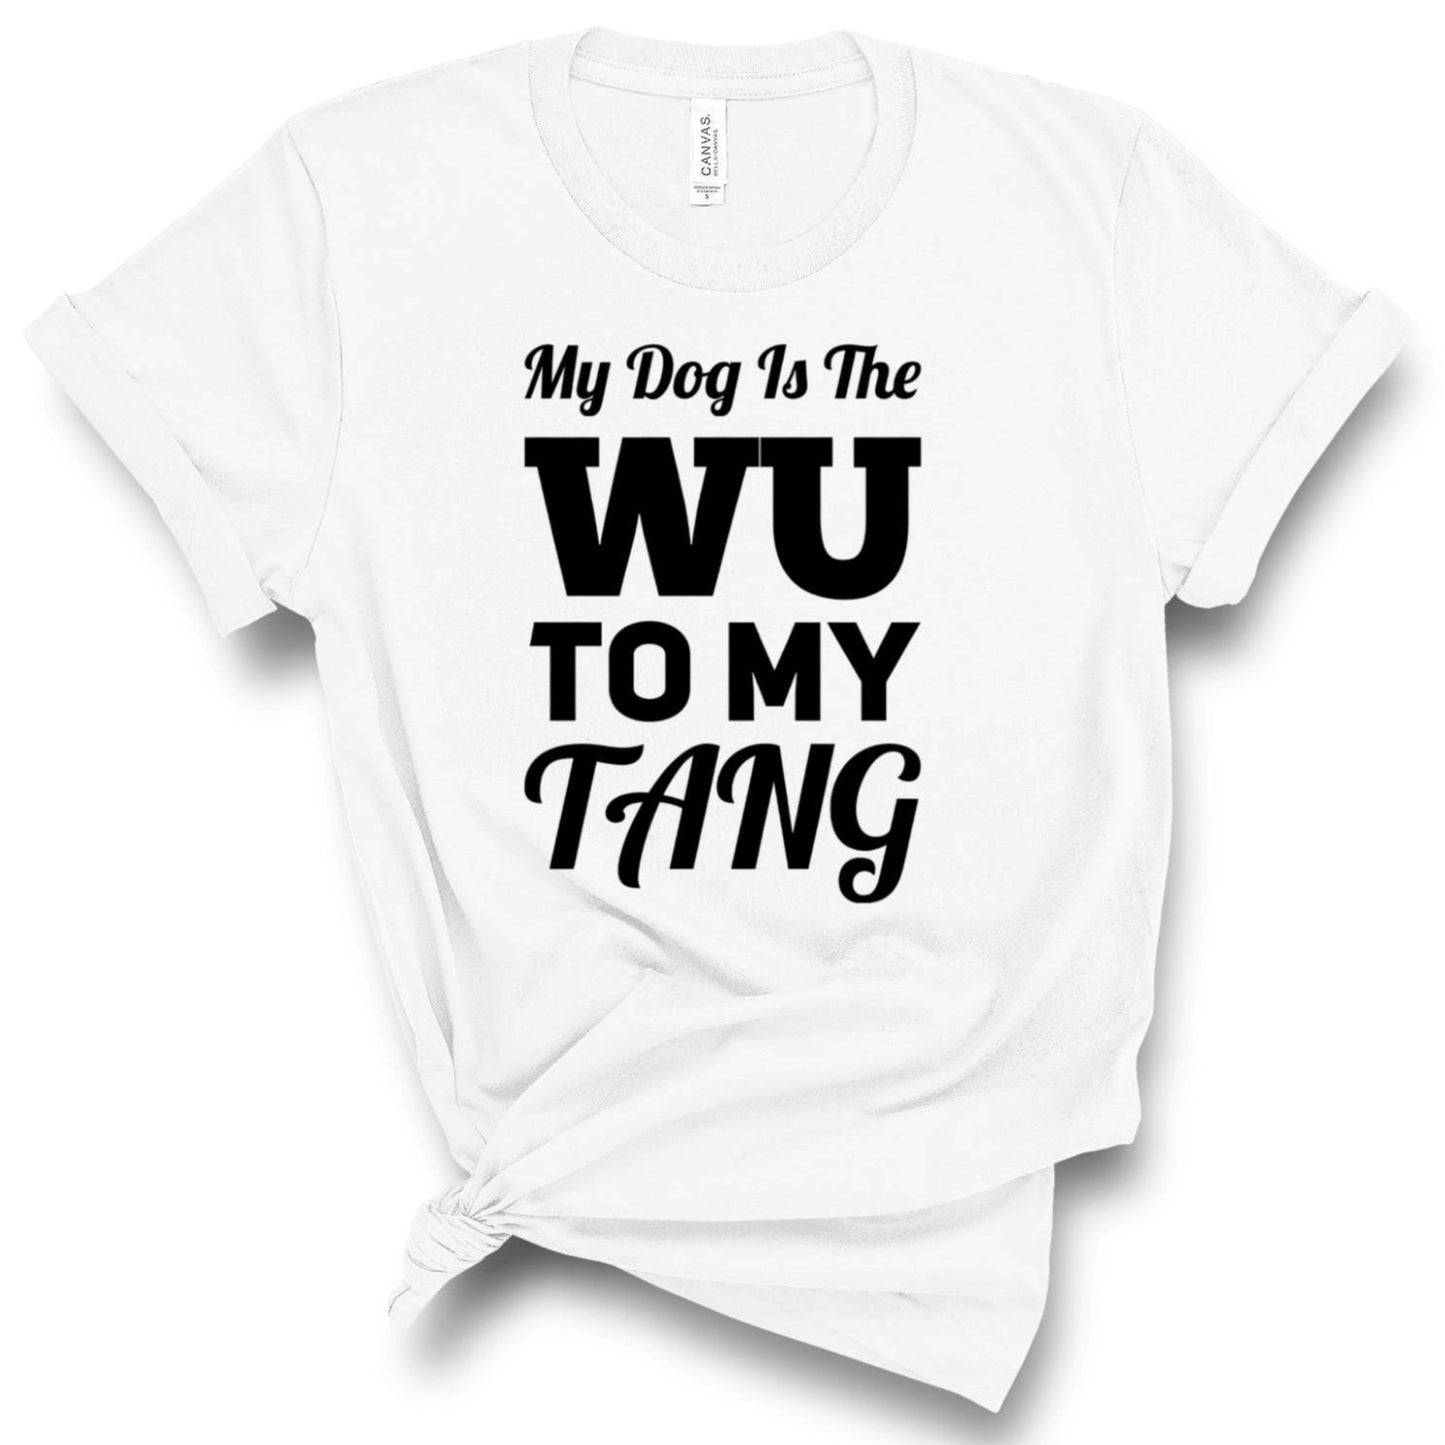 My Dog Is the WU To My TANG